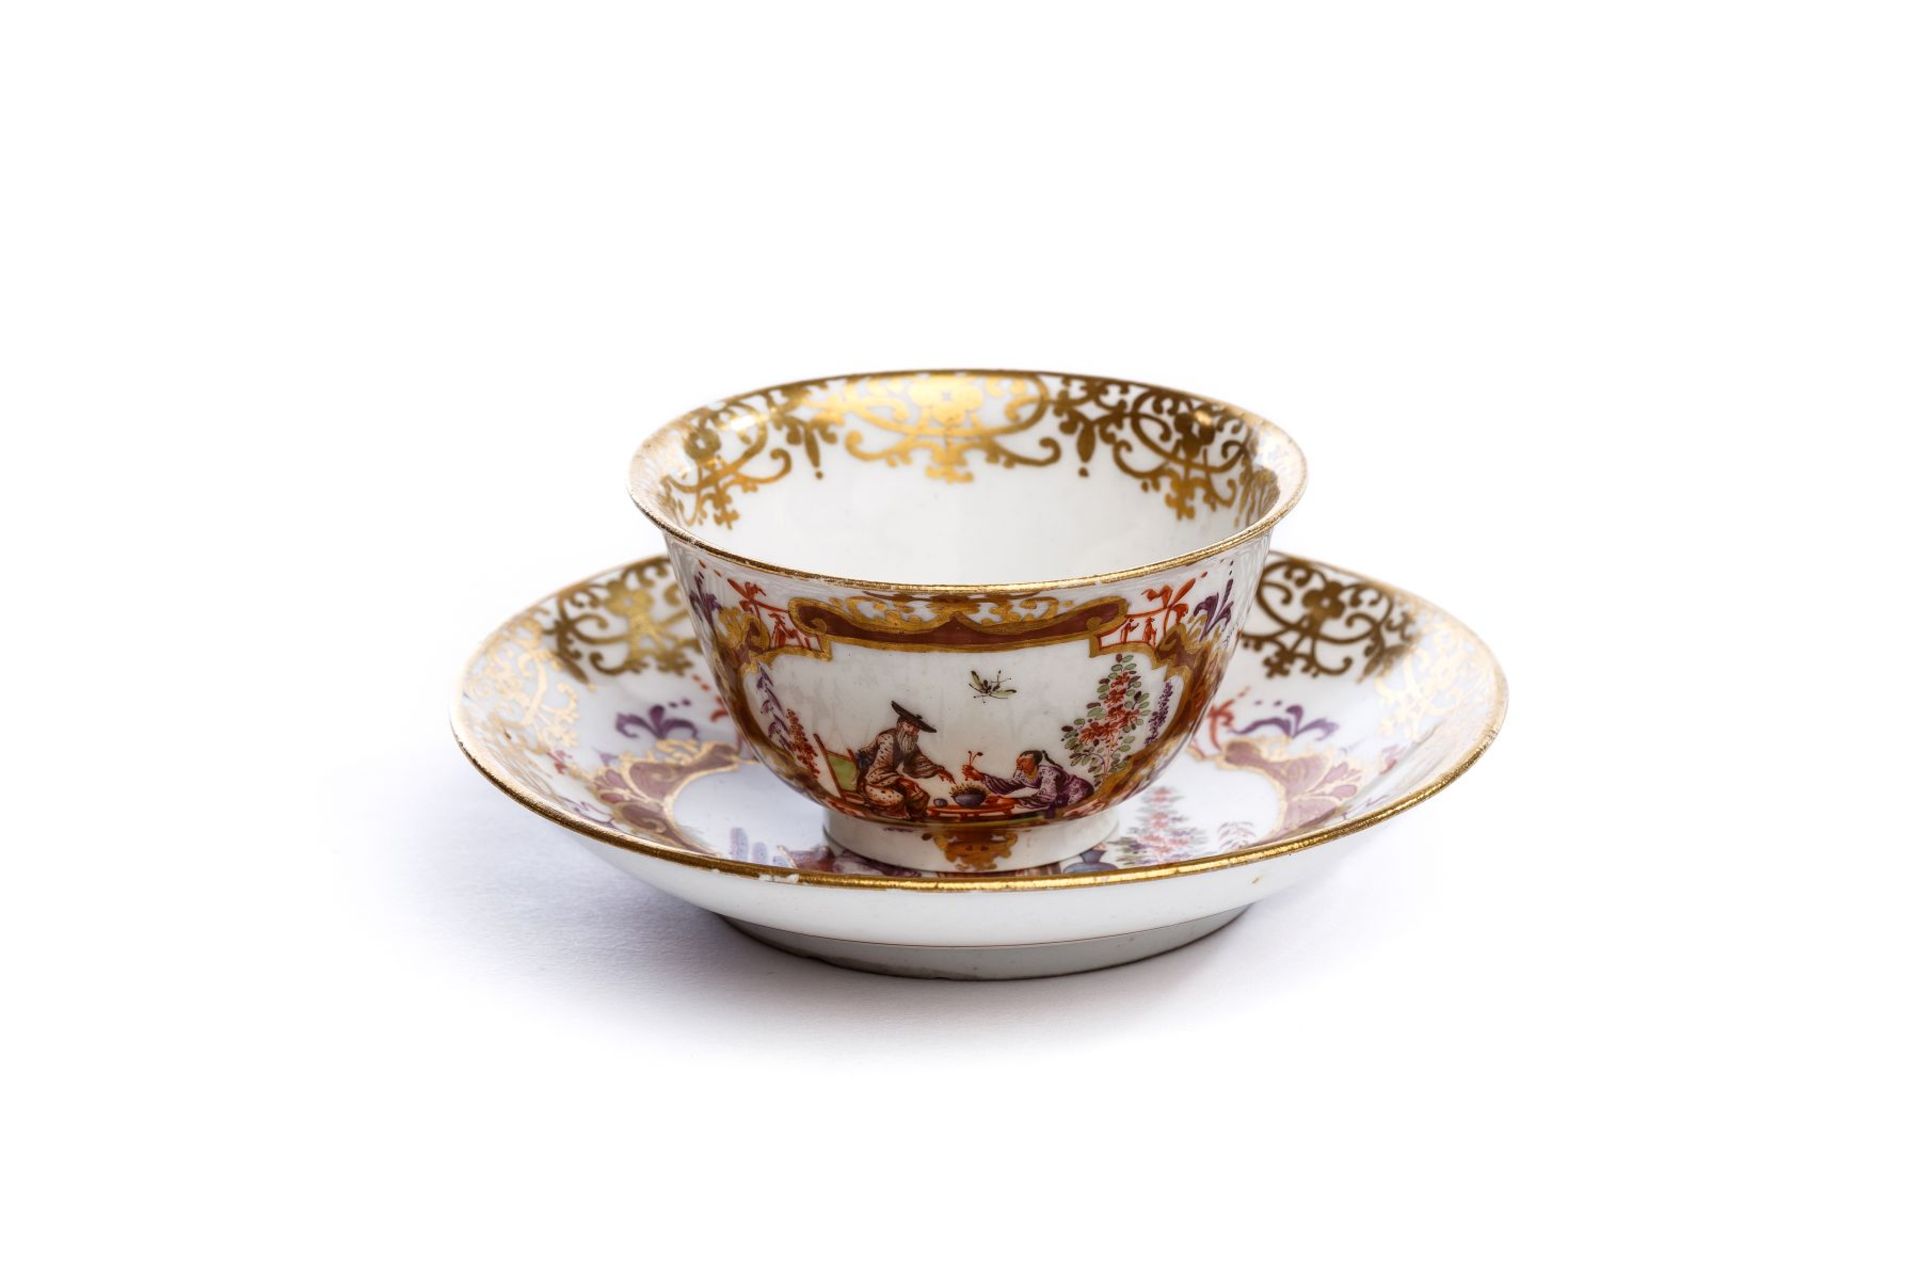 Bowl with saucer, Meissen 1725 - Image 4 of 6